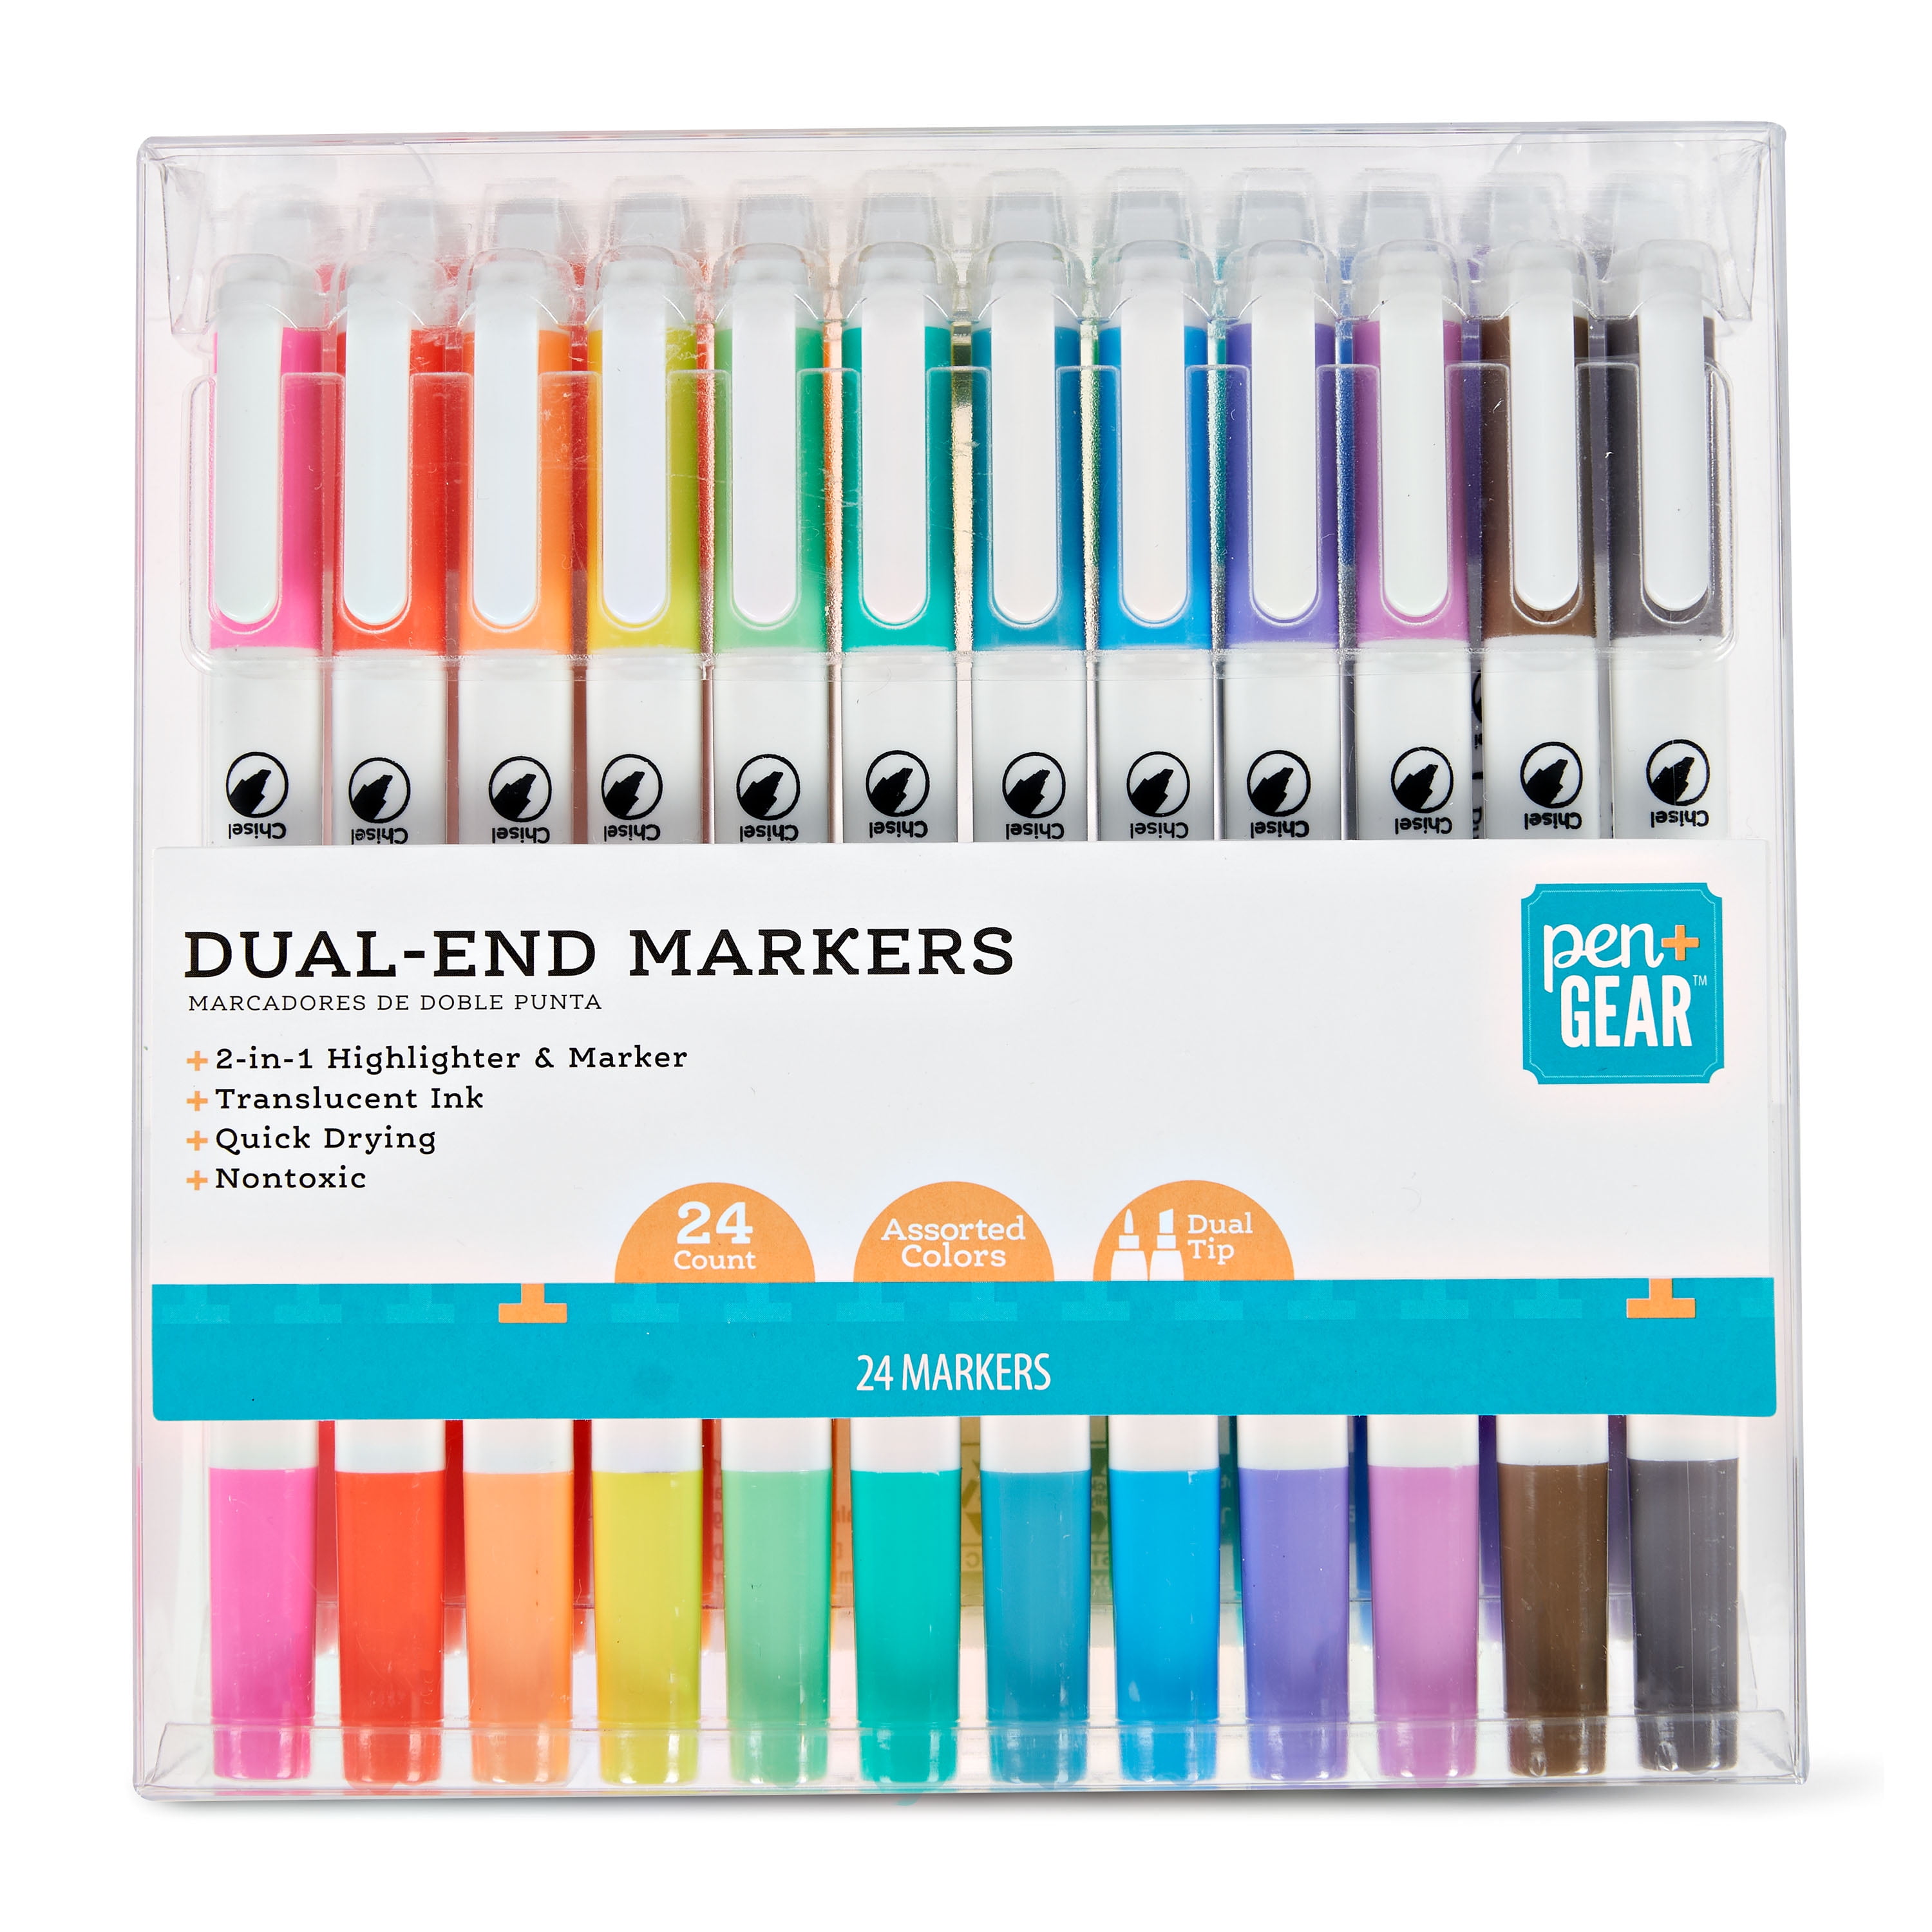 Brilliant Feud teacher Pen + Gear Dual-Tip Markers, Fine Tip Marker and Chisel Tip Highlighter,  Assorted Colors, 24 Count - Walmart.com